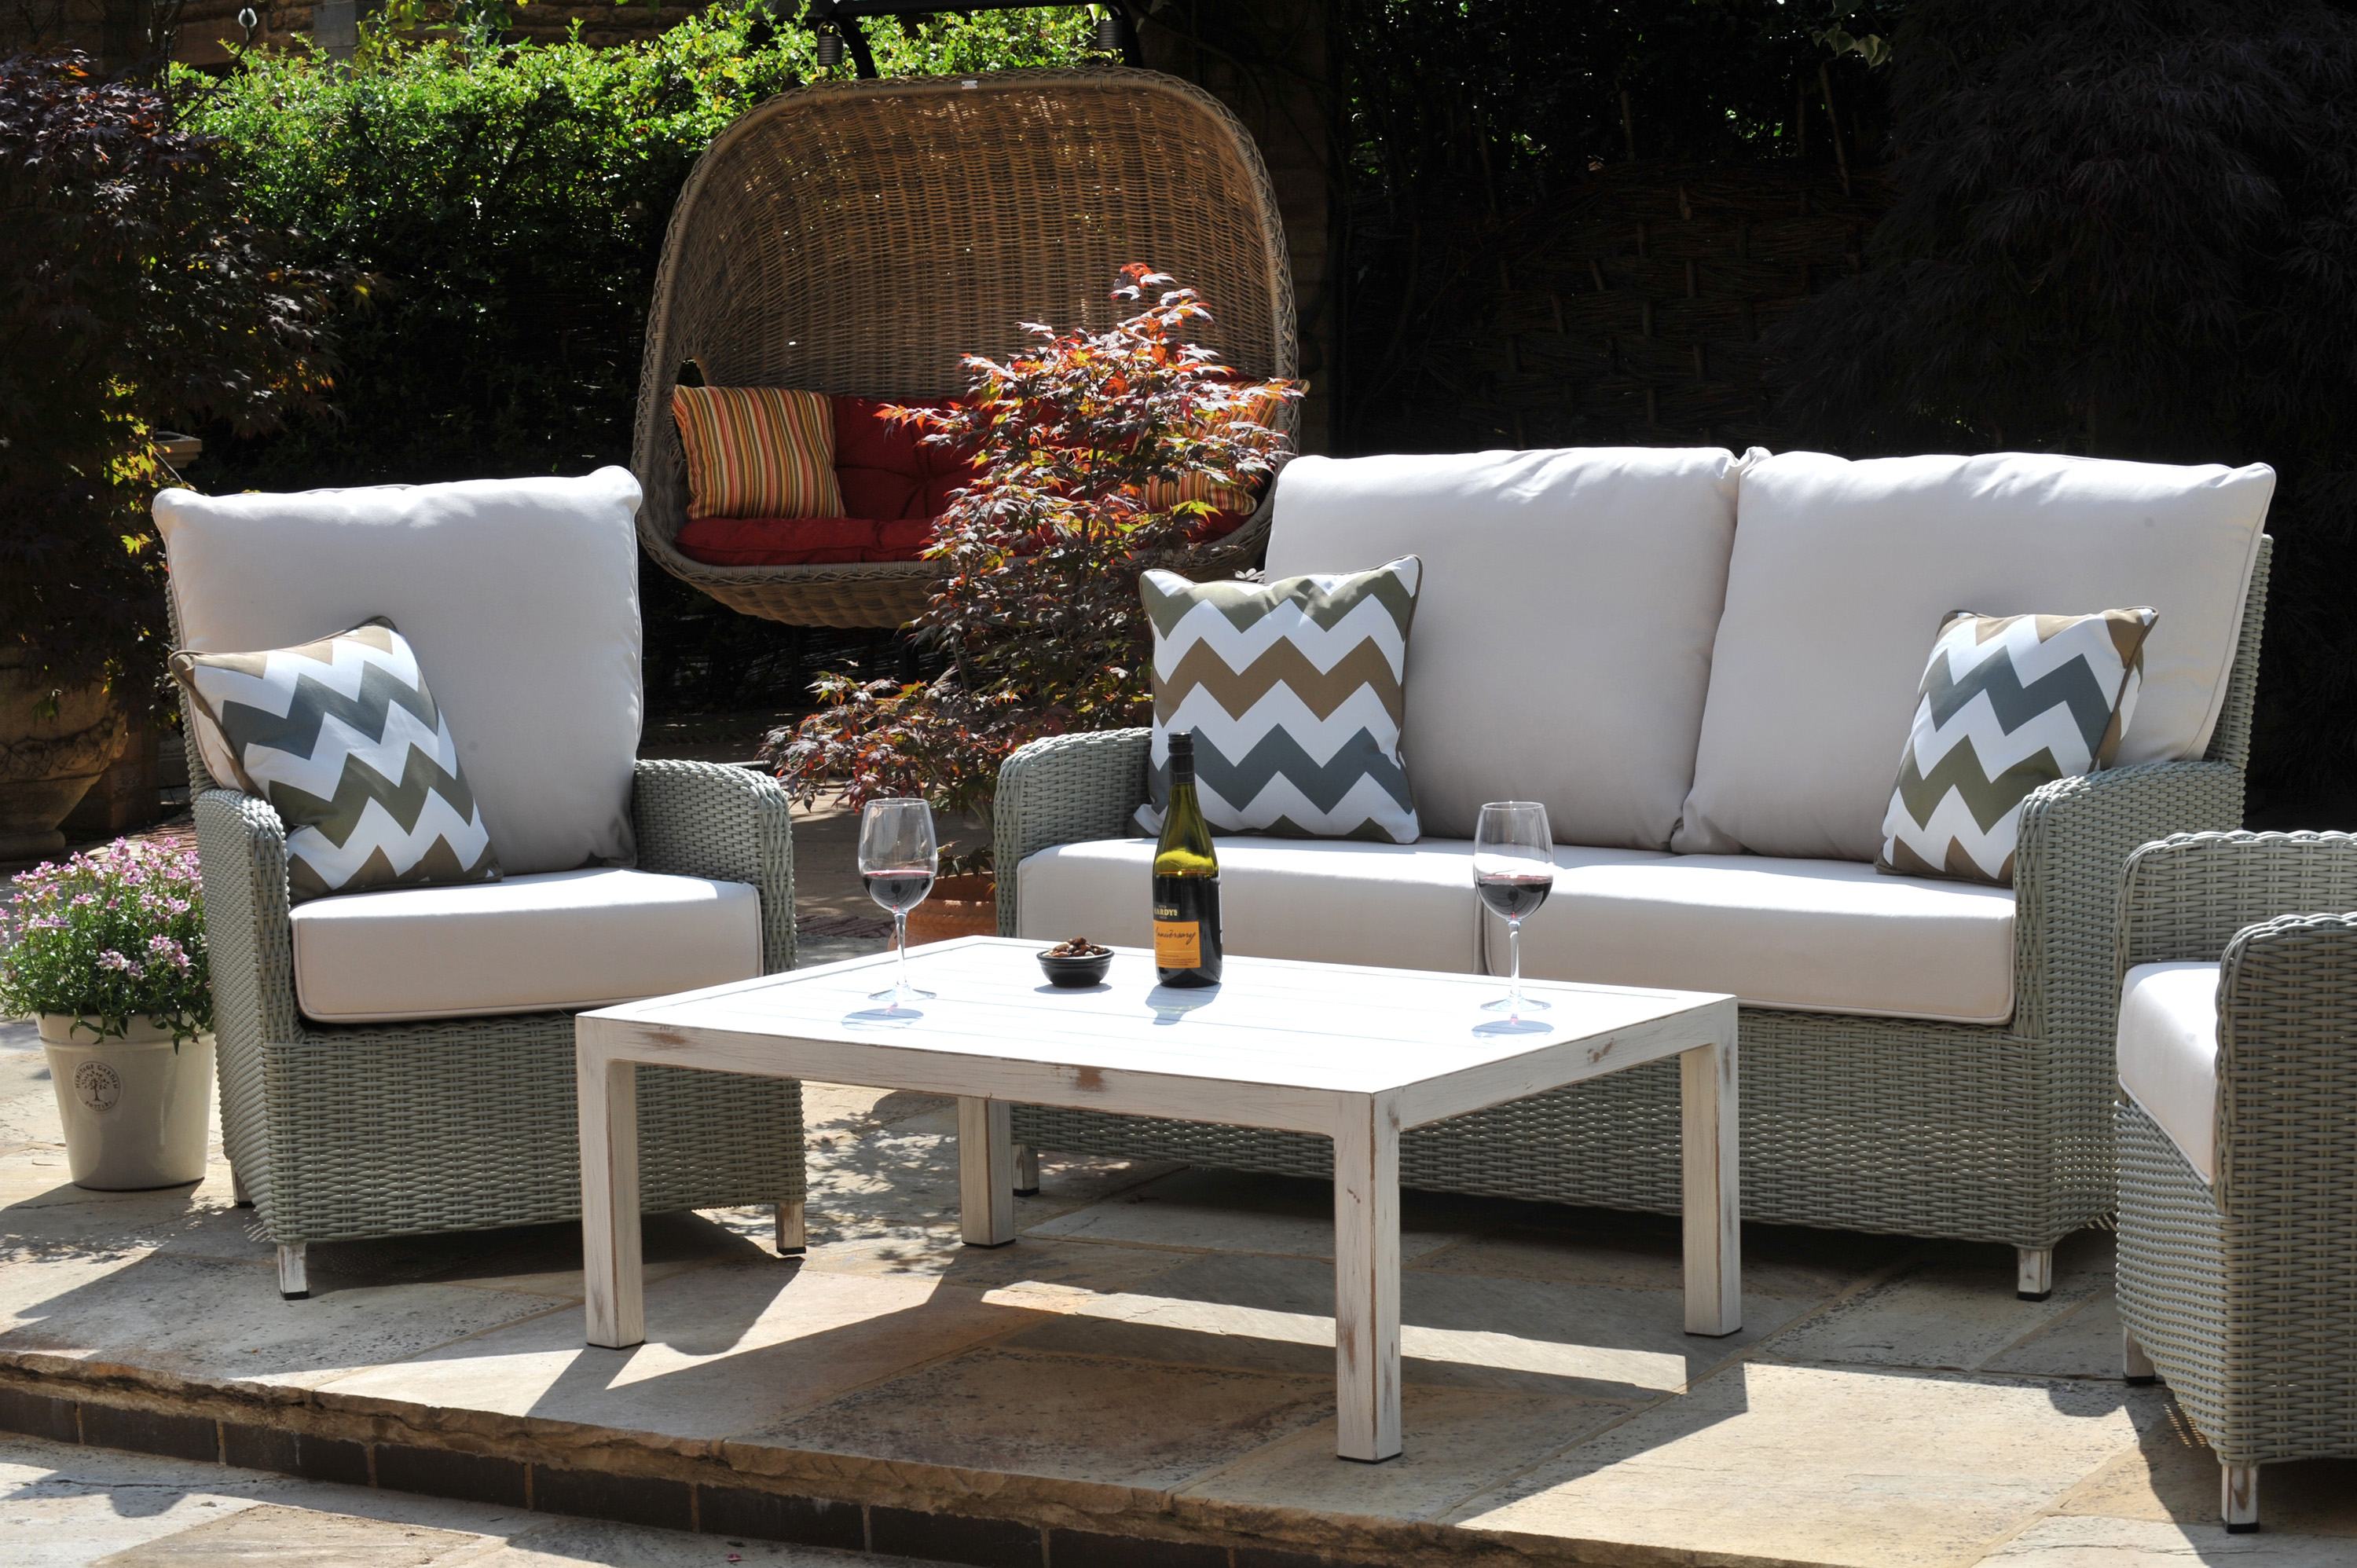 grey outdoor cane furniture suite on a patio